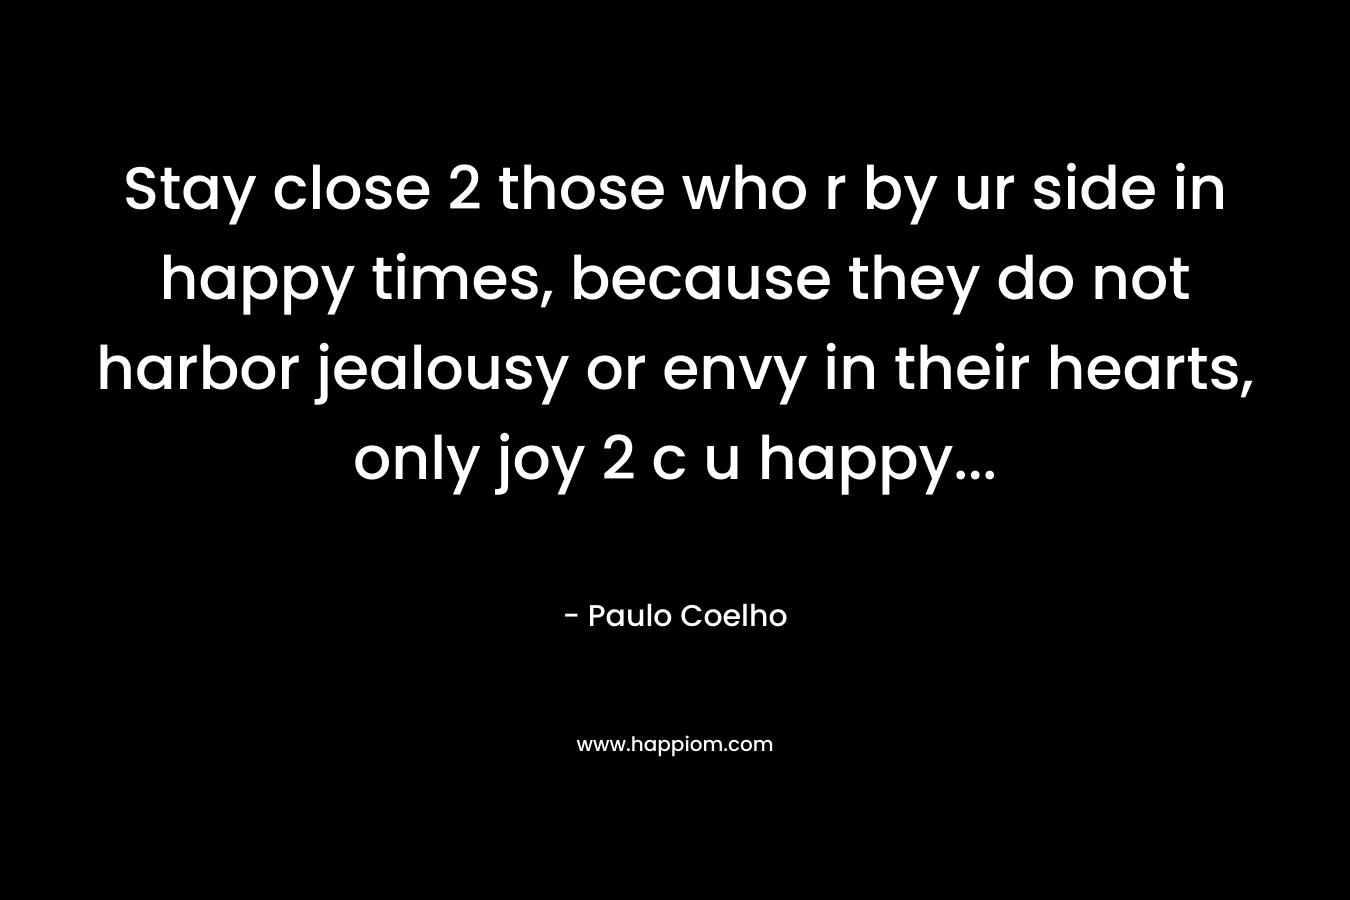 Stay close 2 those who r by ur side in happy times, because they do not harbor jealousy or envy in their hearts, only joy 2 c u happy… – Paulo Coelho